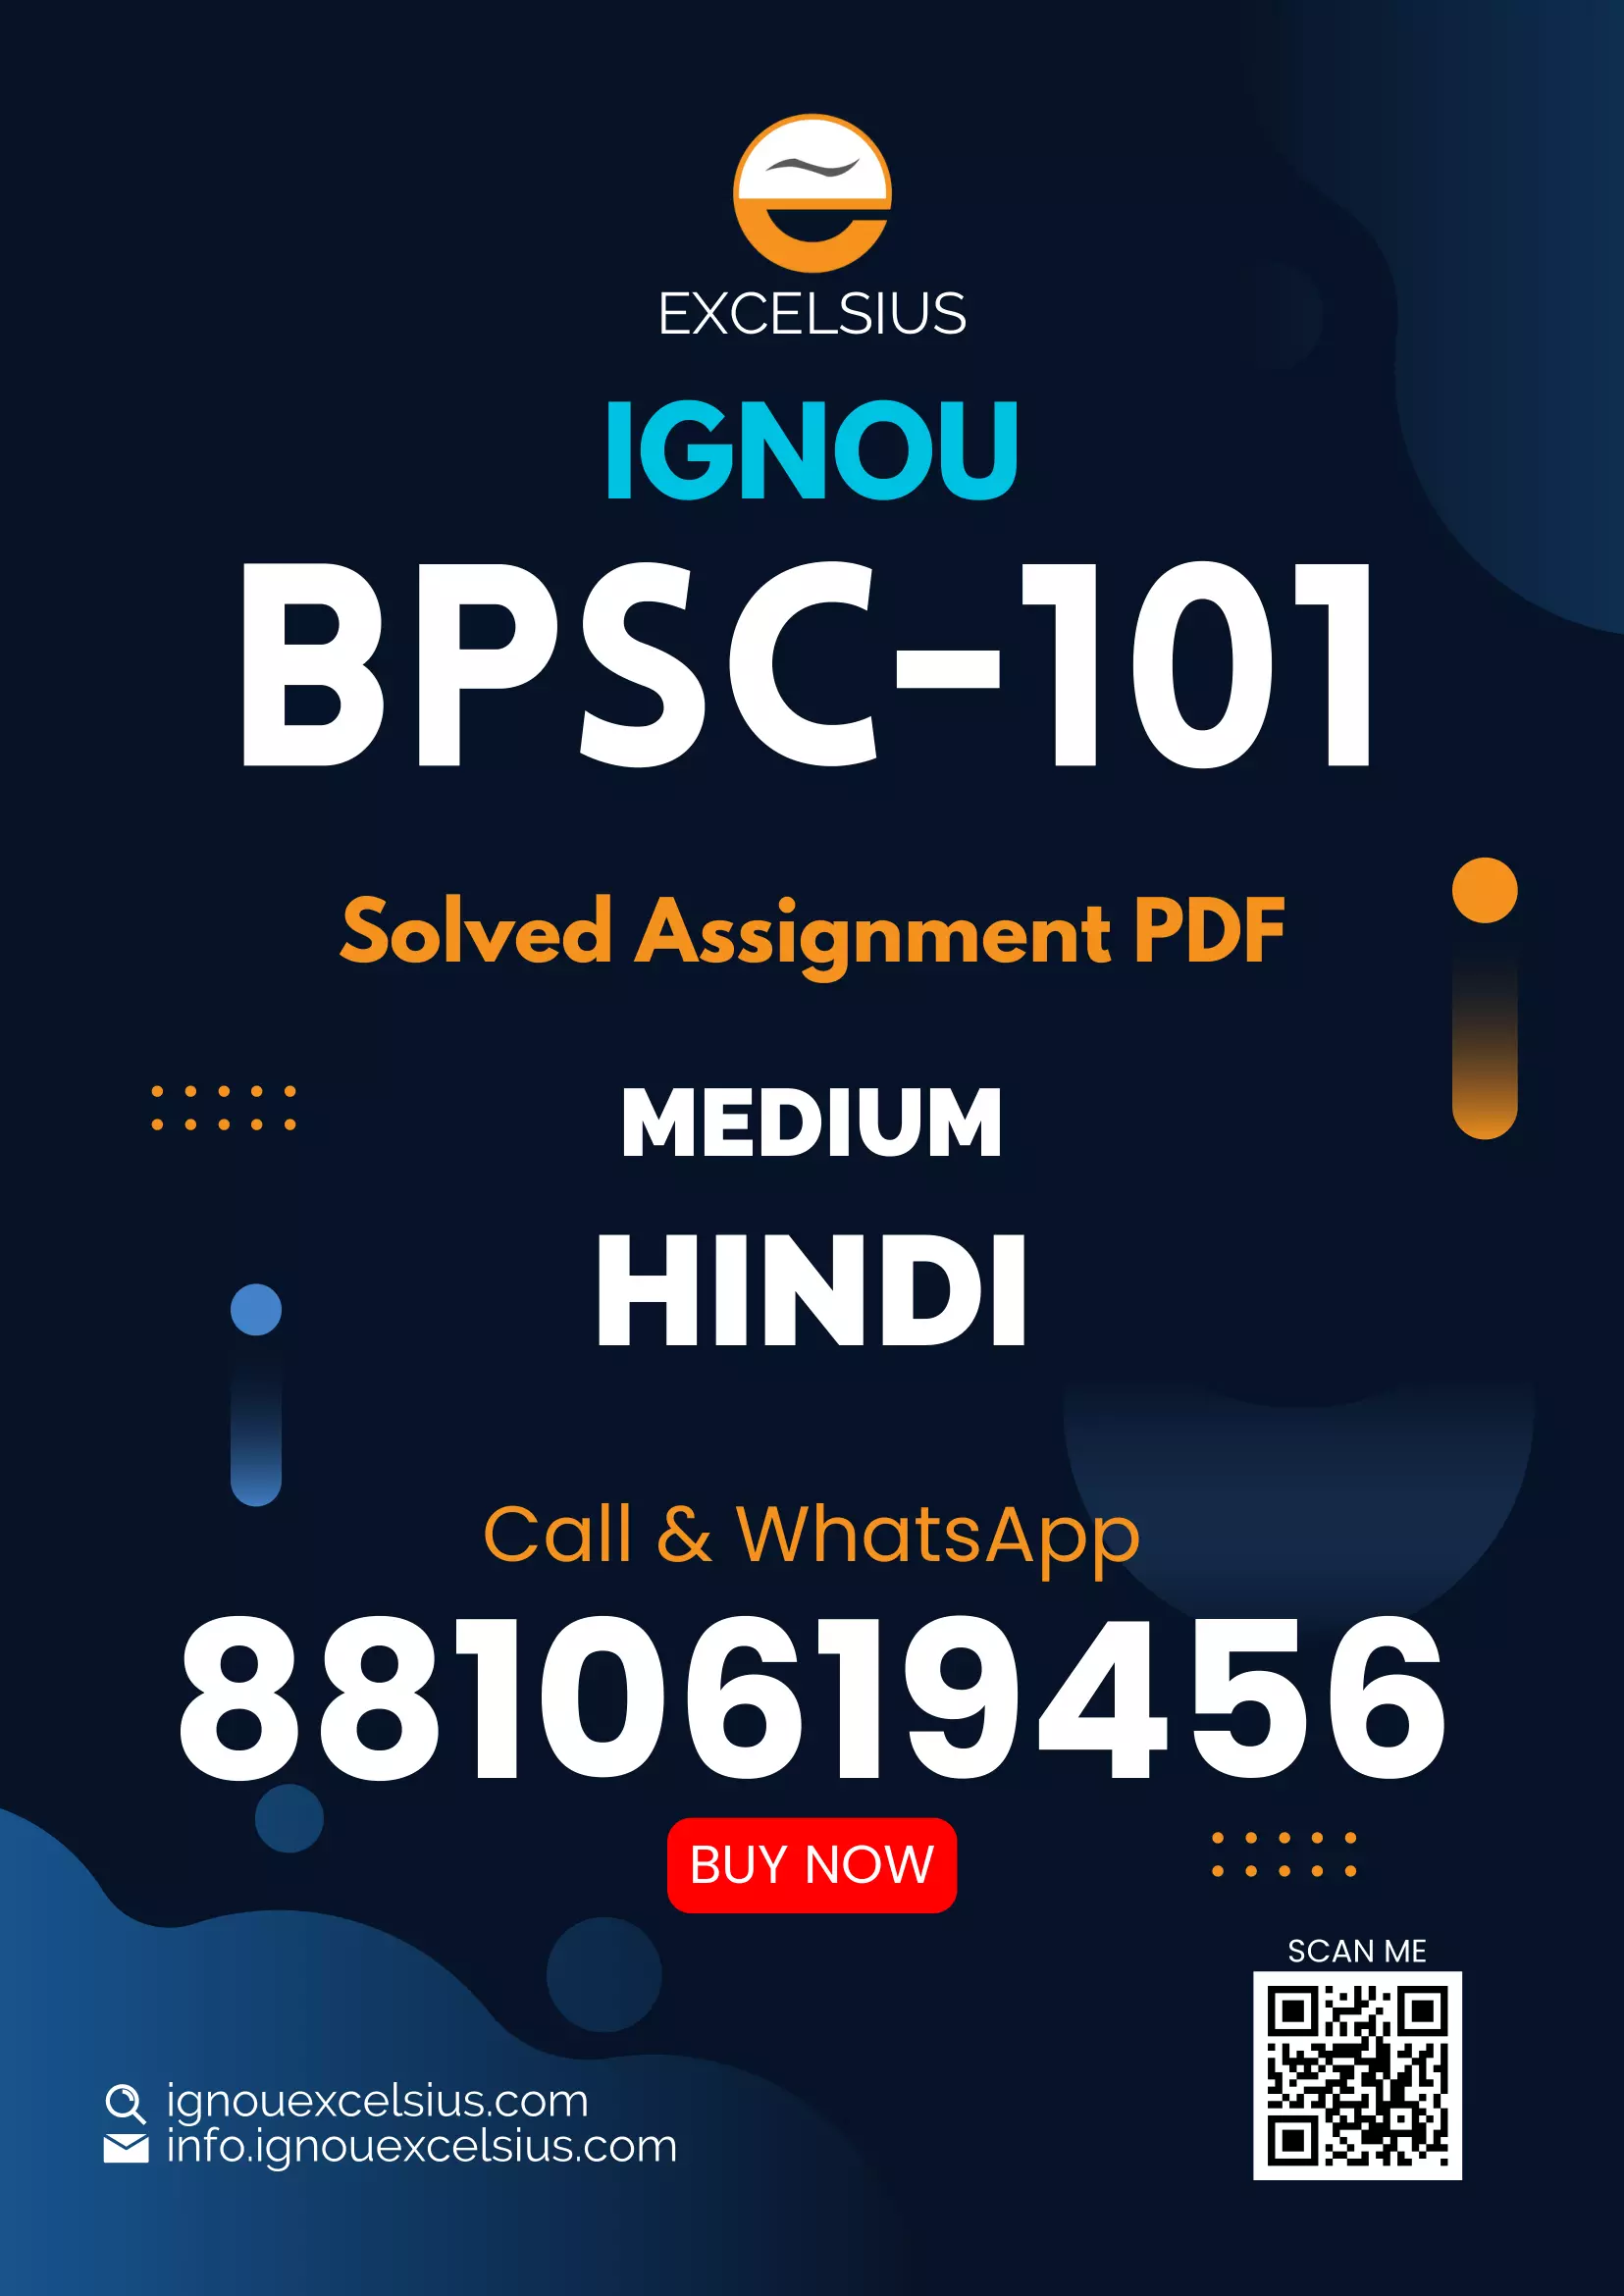 IGNOU BPSC-101 - Understanding Political Theory, Latest Solved Assignment-July 2022 – January 2023